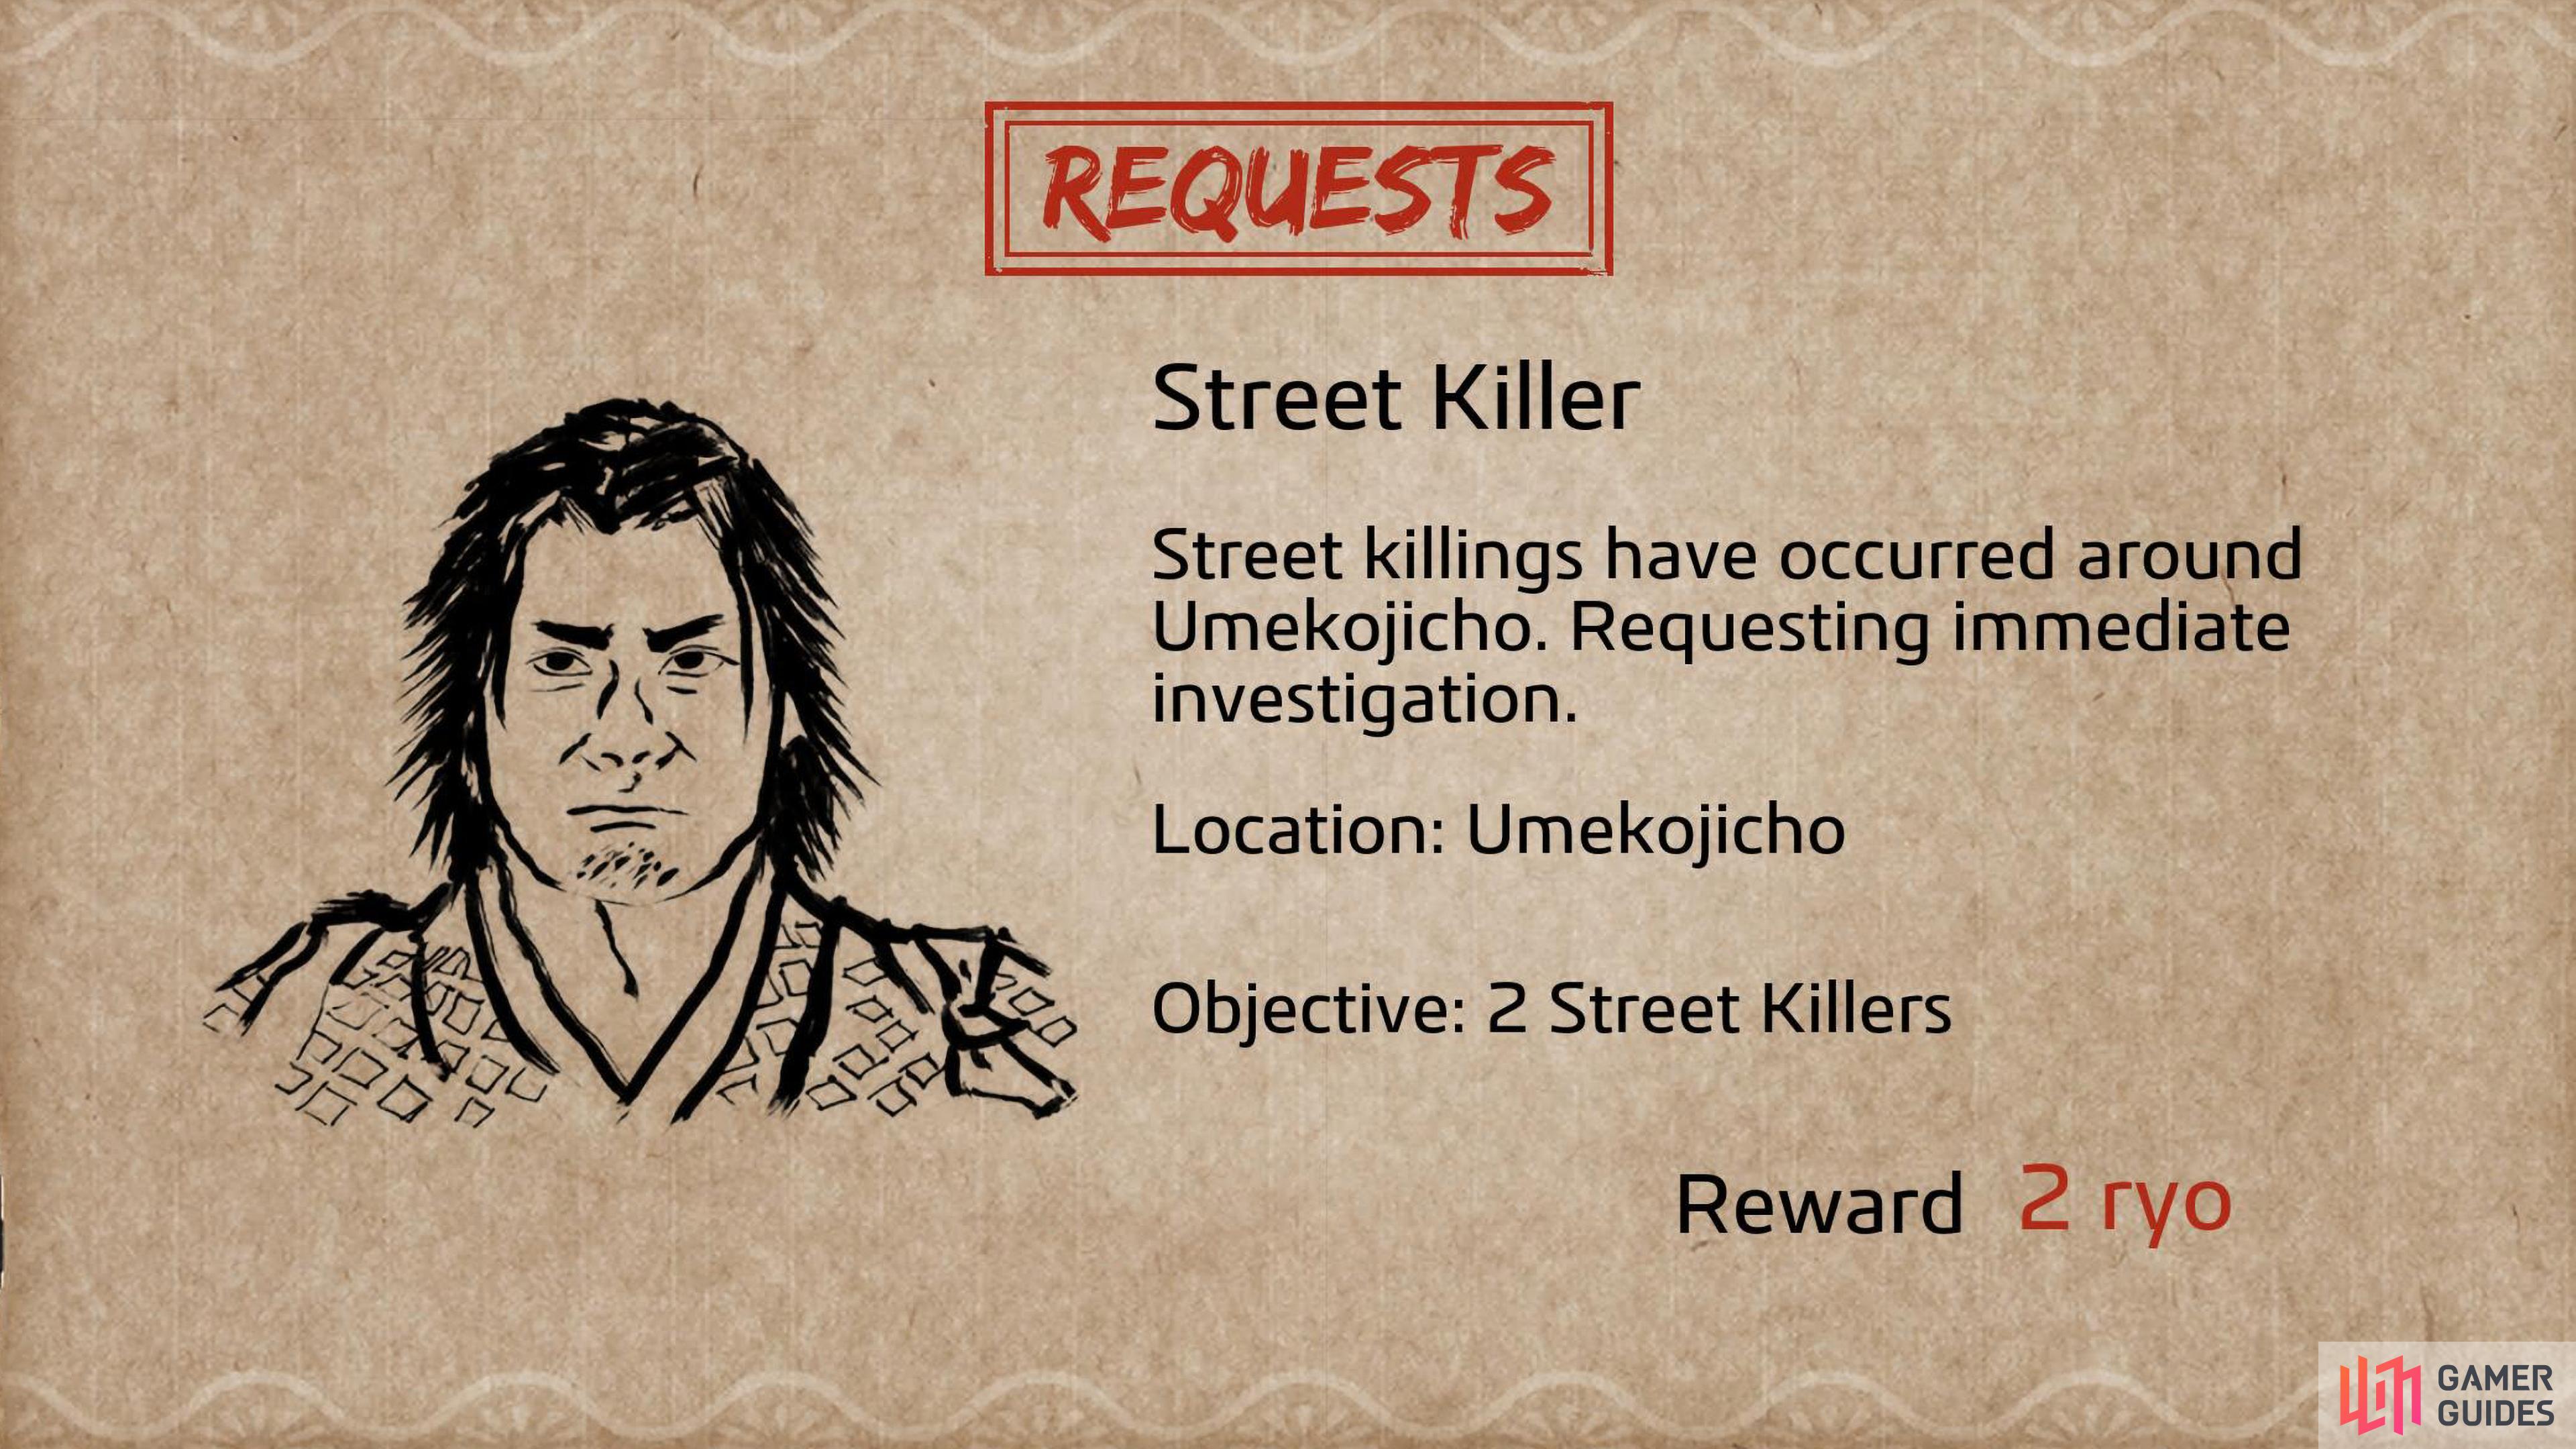 Street Killer: Aramasa will be your sixth Wanted Men Request.